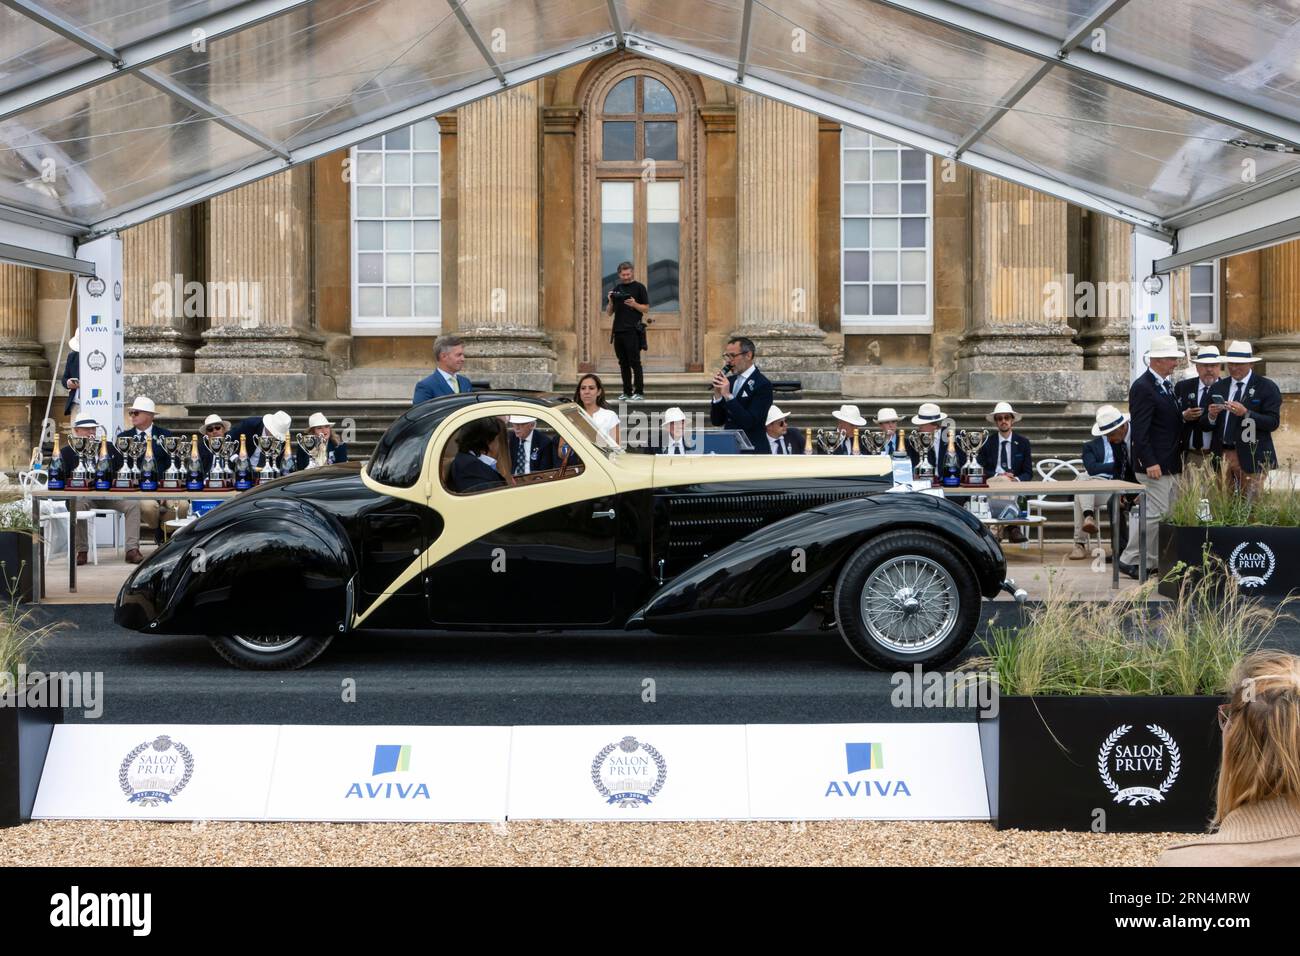 1938 Bugatti Type 57C Atalante Rollback Coupe at the 2023 Salon Prive Concours at Blenheim Palace Woodstock Oxfordshire UK Stock Photo